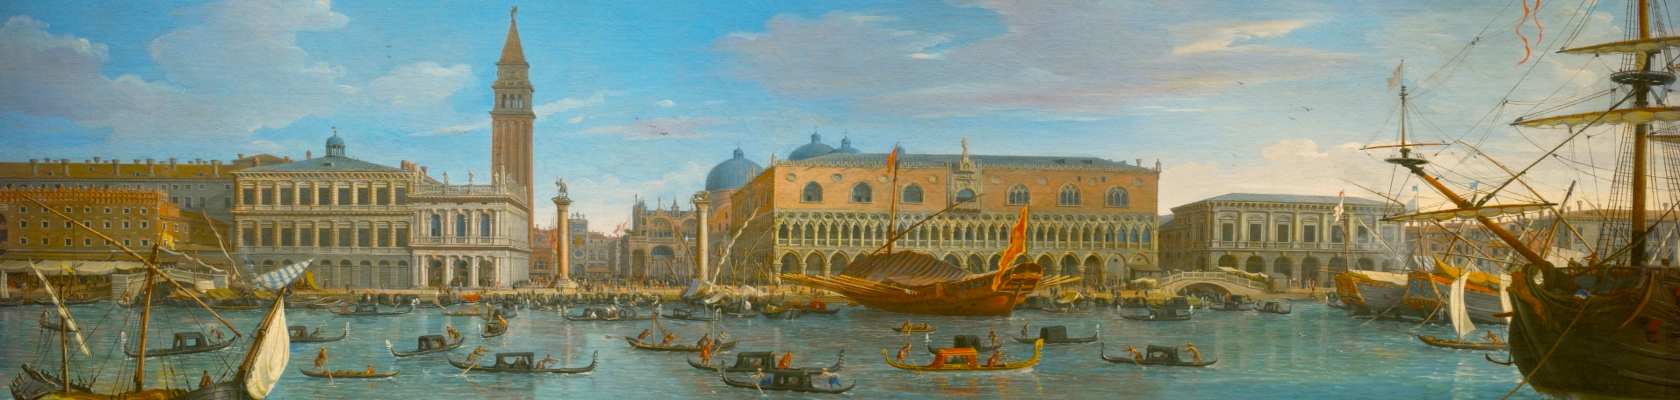 View_of_Venice_from_the_Island_of_San_Giorgio.jpg